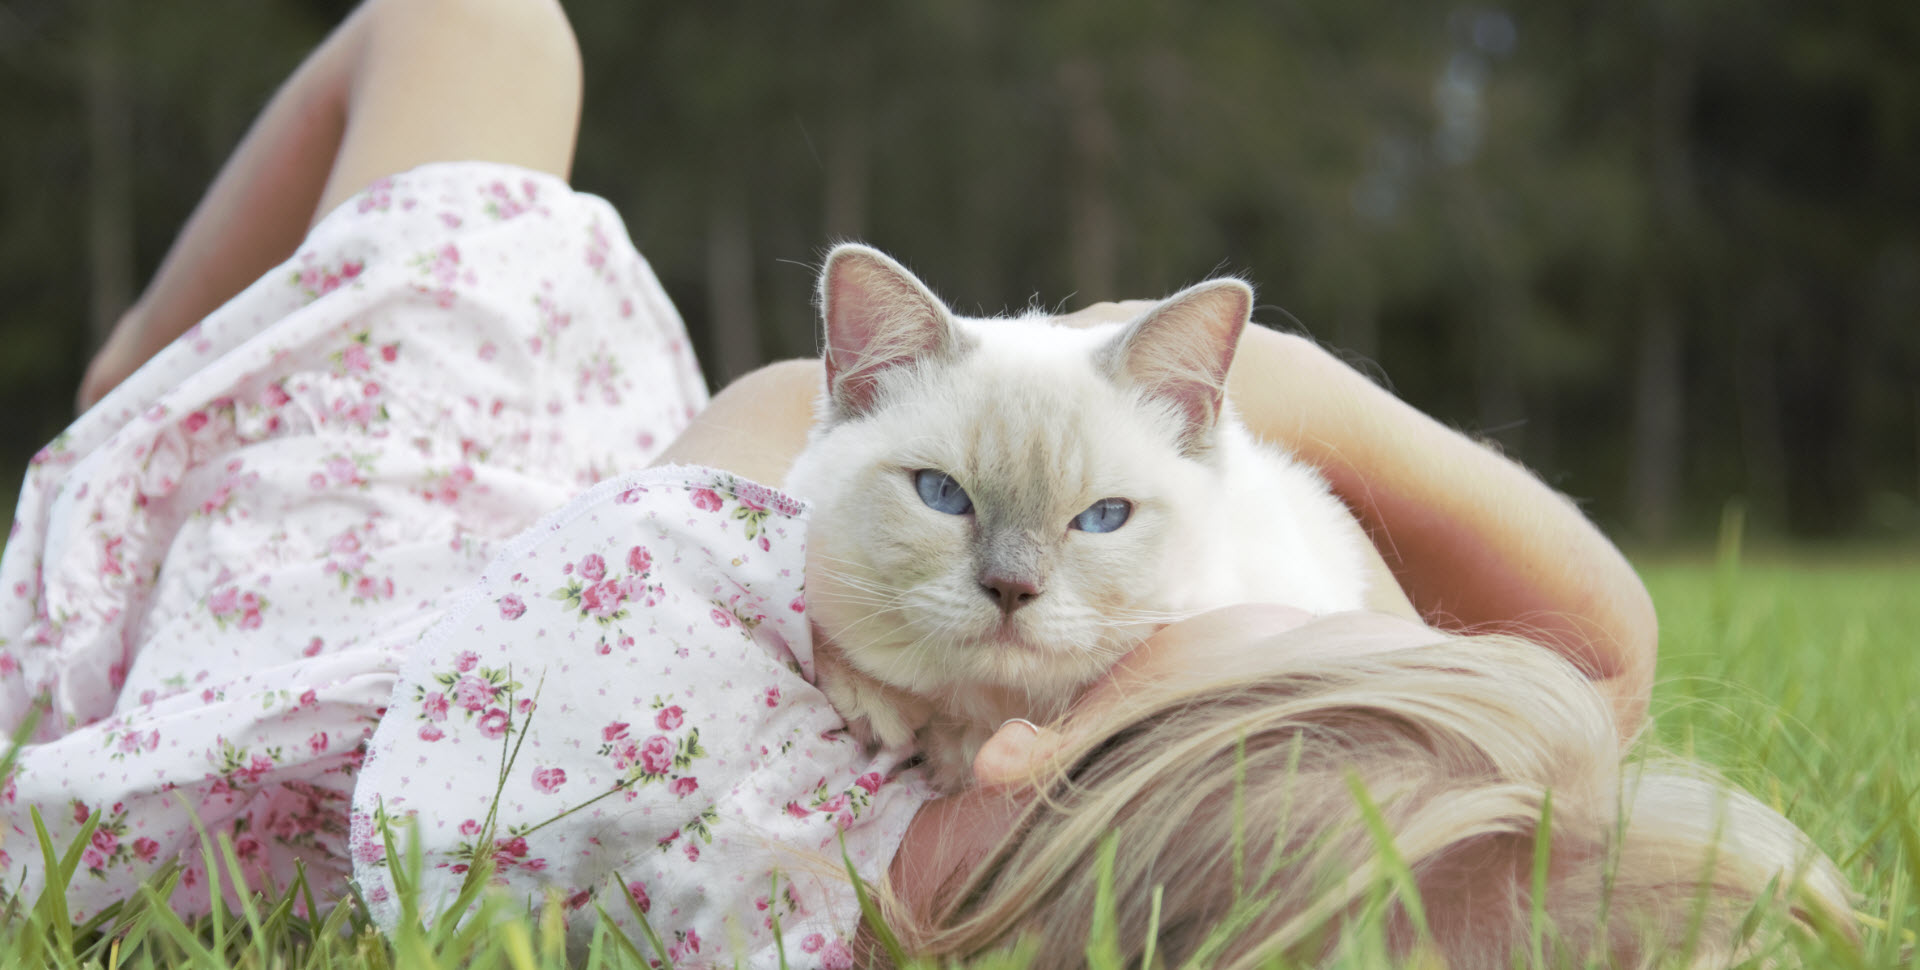 Tiger, a lilac point Purebred Ragdoll sire enjoying hugs and play time in the grass.